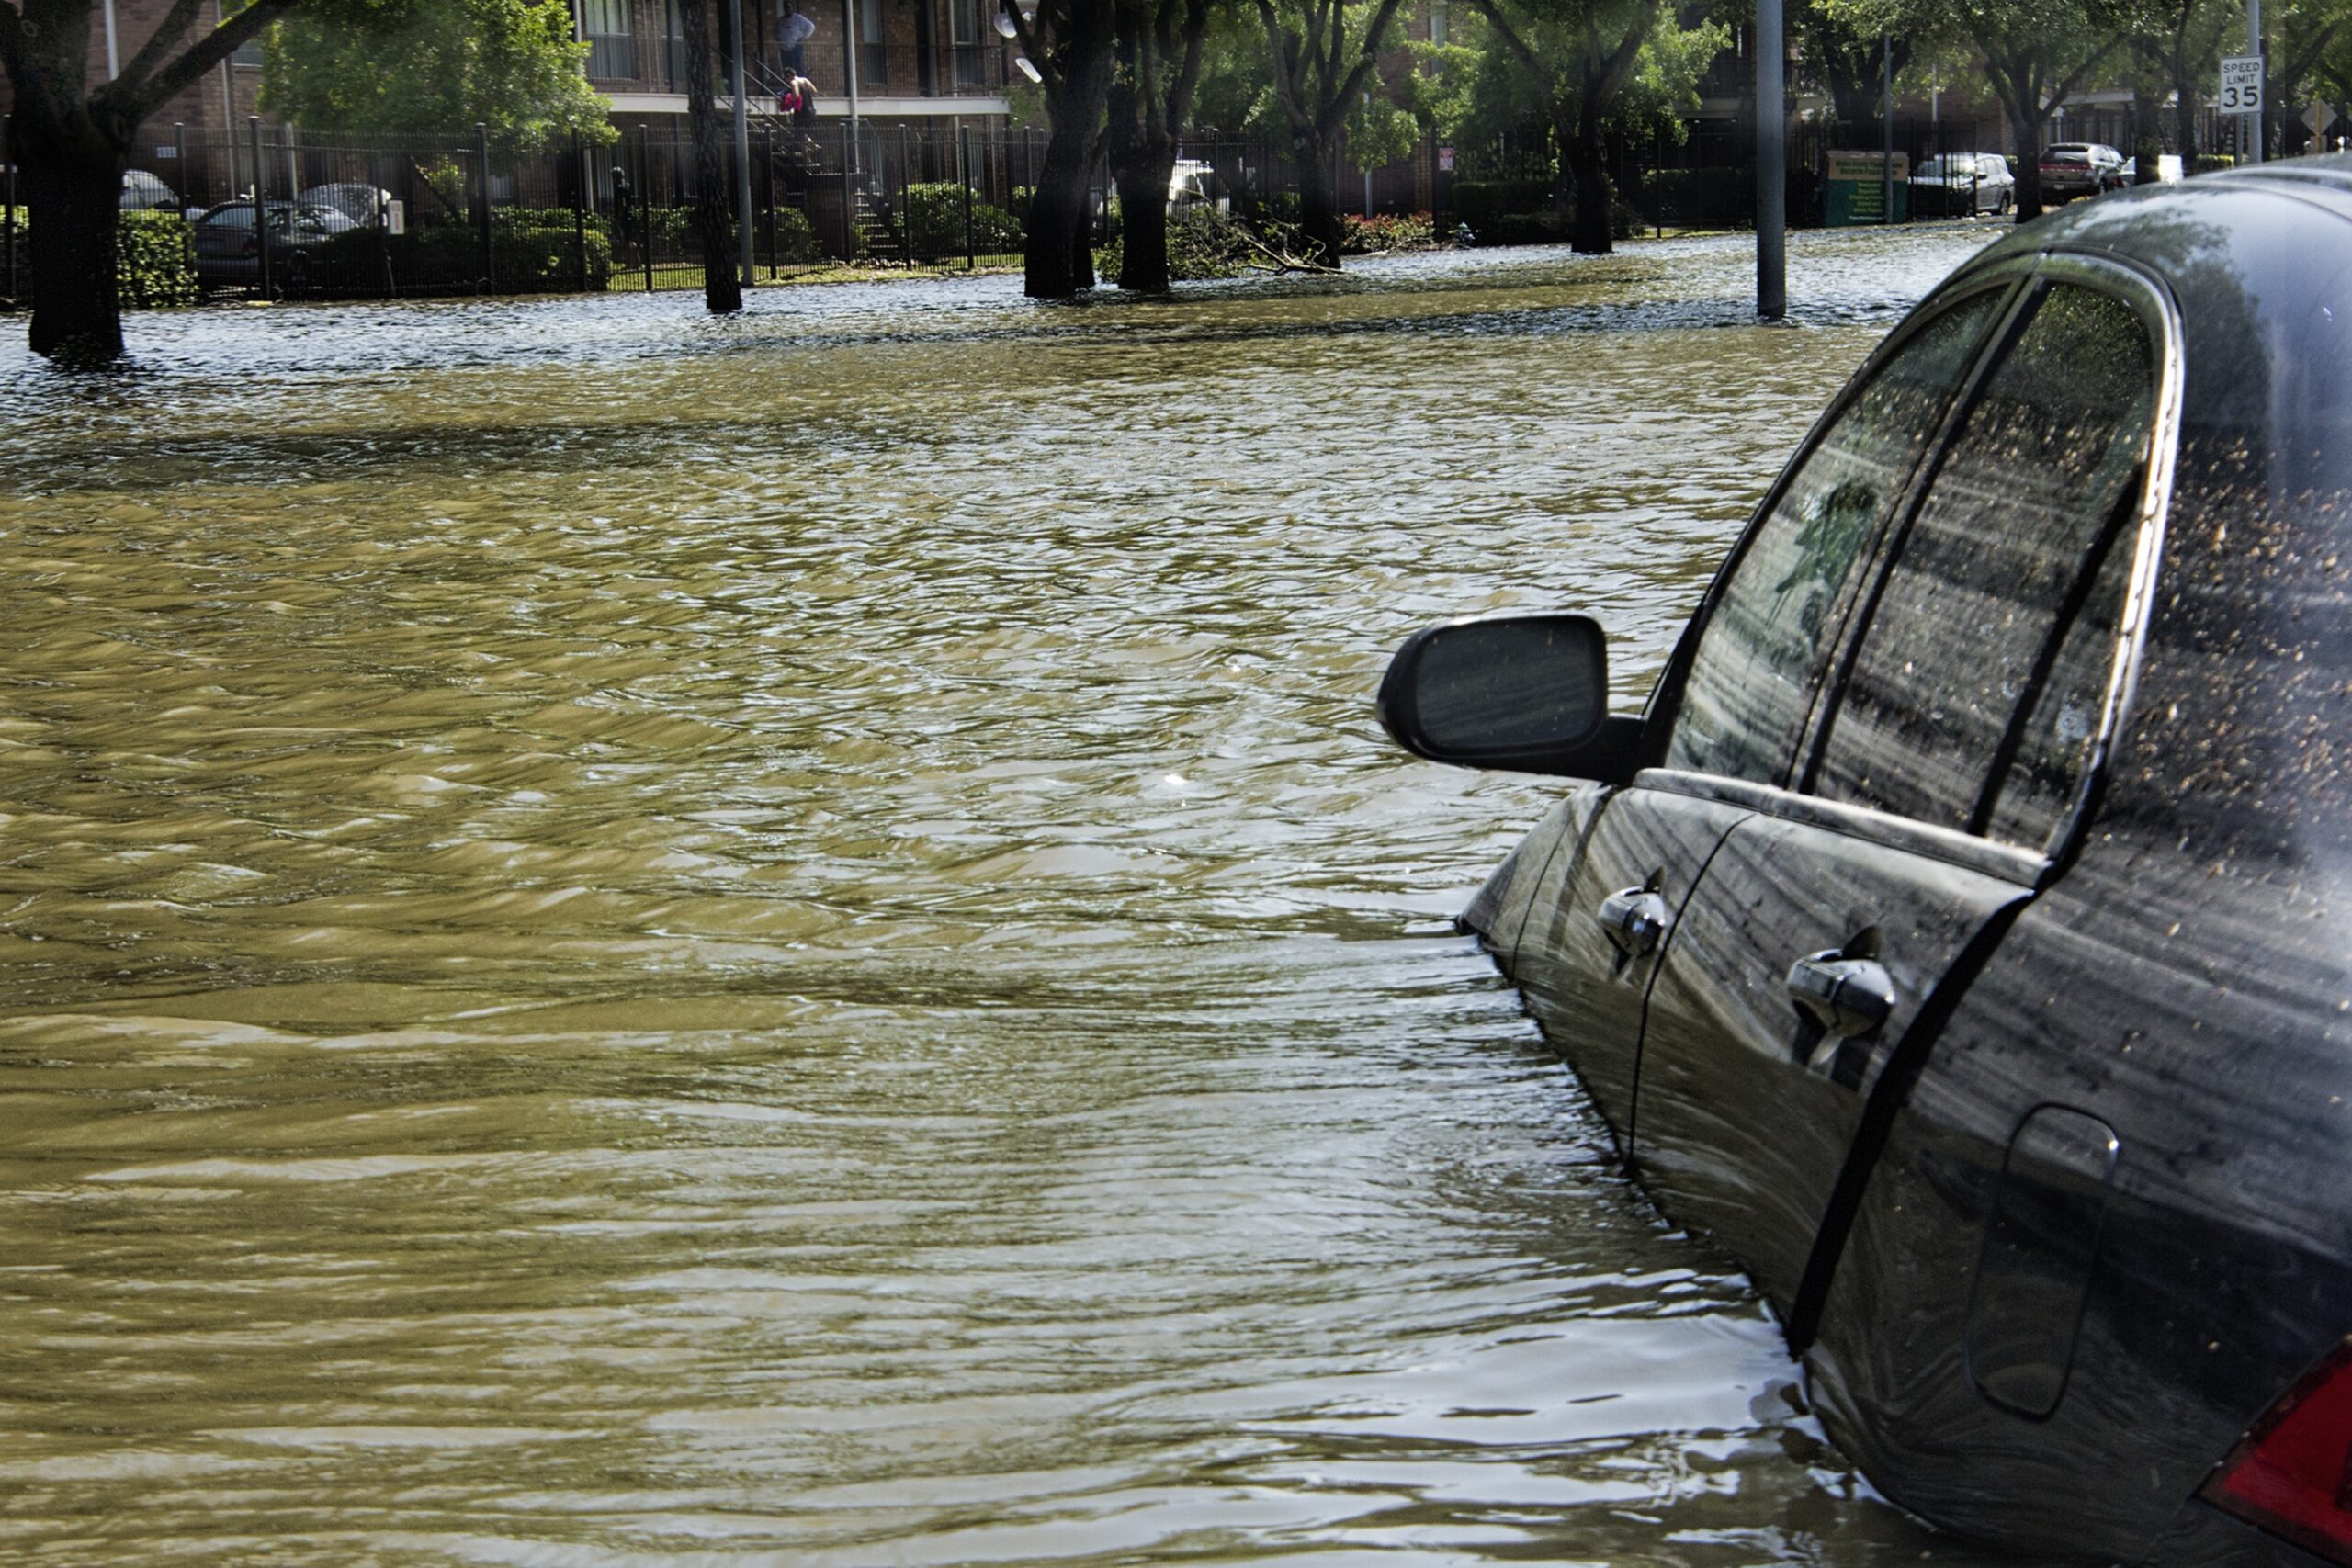 A vehicle halfway submerged on a flooded street.